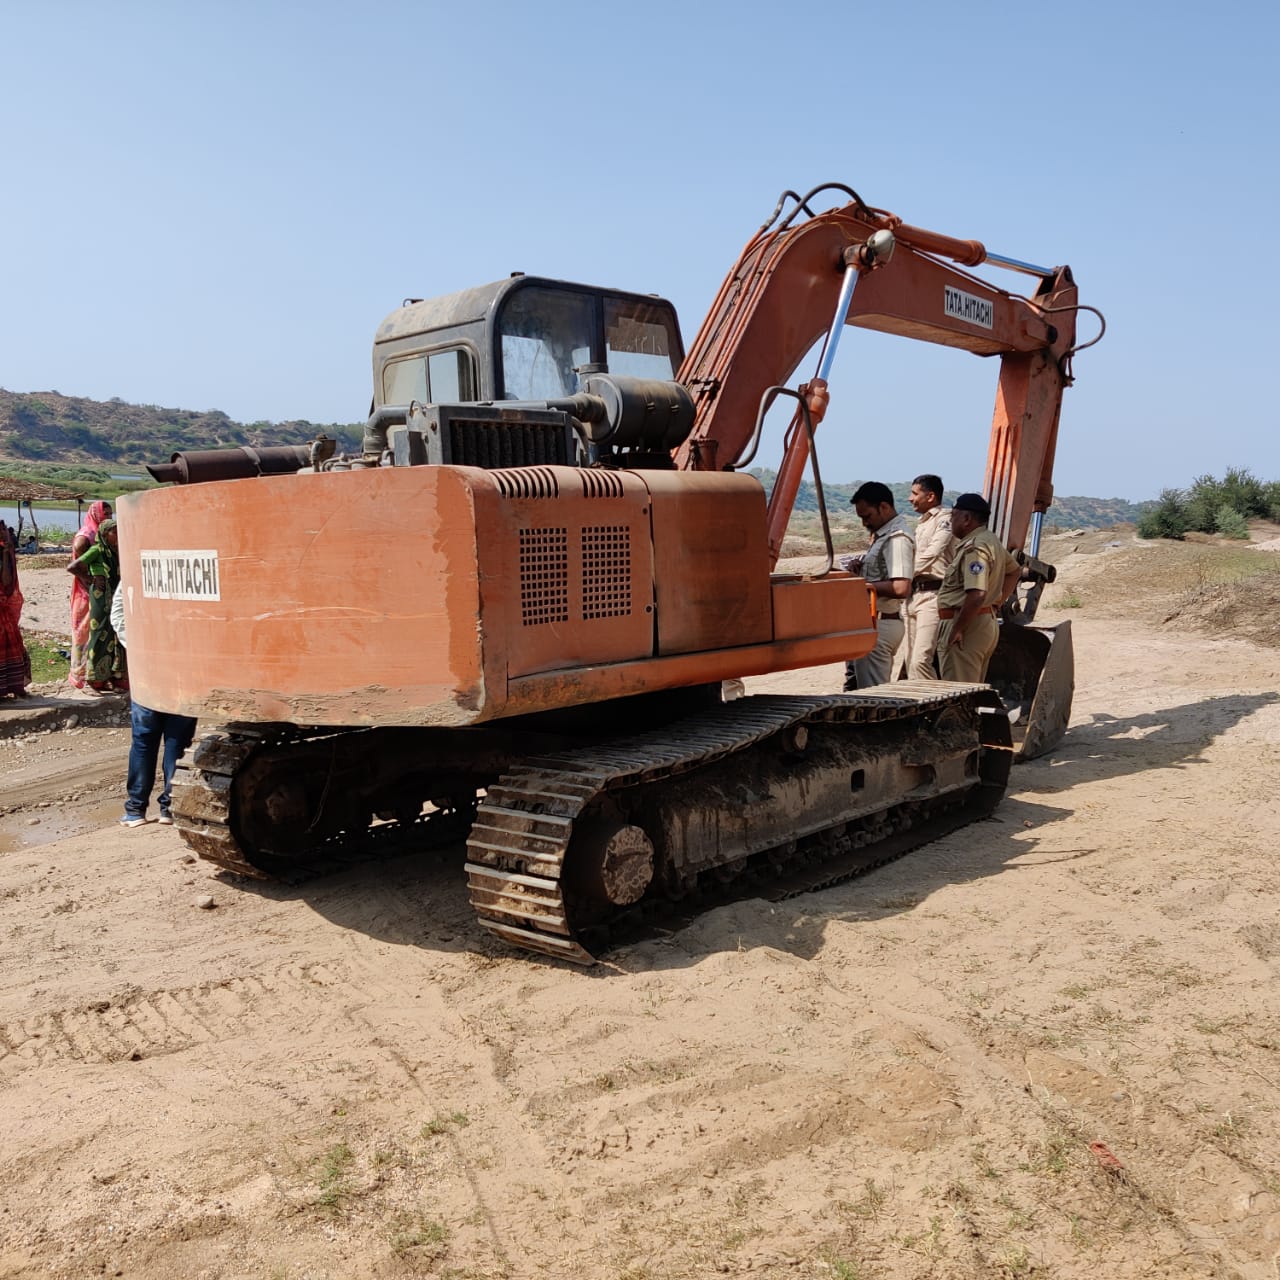 Mines and Minerals Department takes help of drones to caught unauthorized excavation of sand in Poicha village of Savli taluka